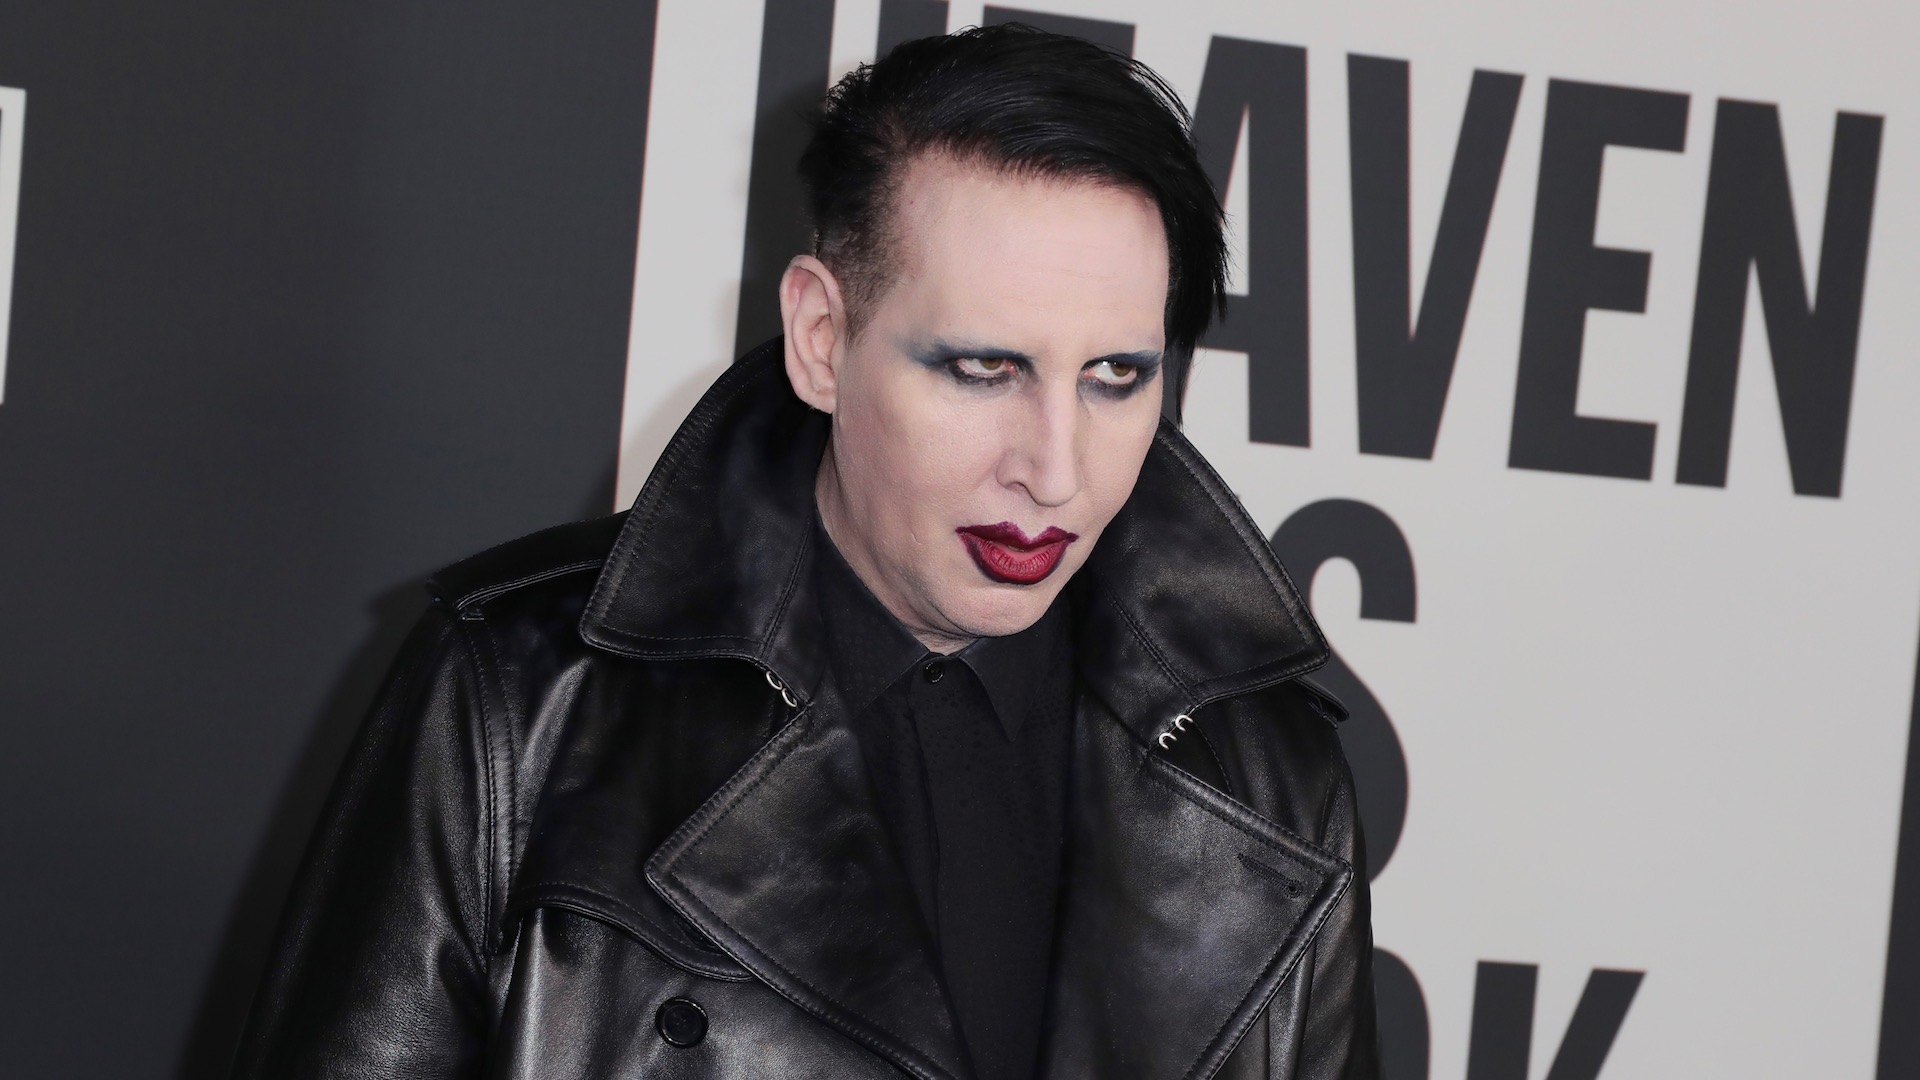 Marilyn Manson removed from Grammys nomination for Kanye West's Jail